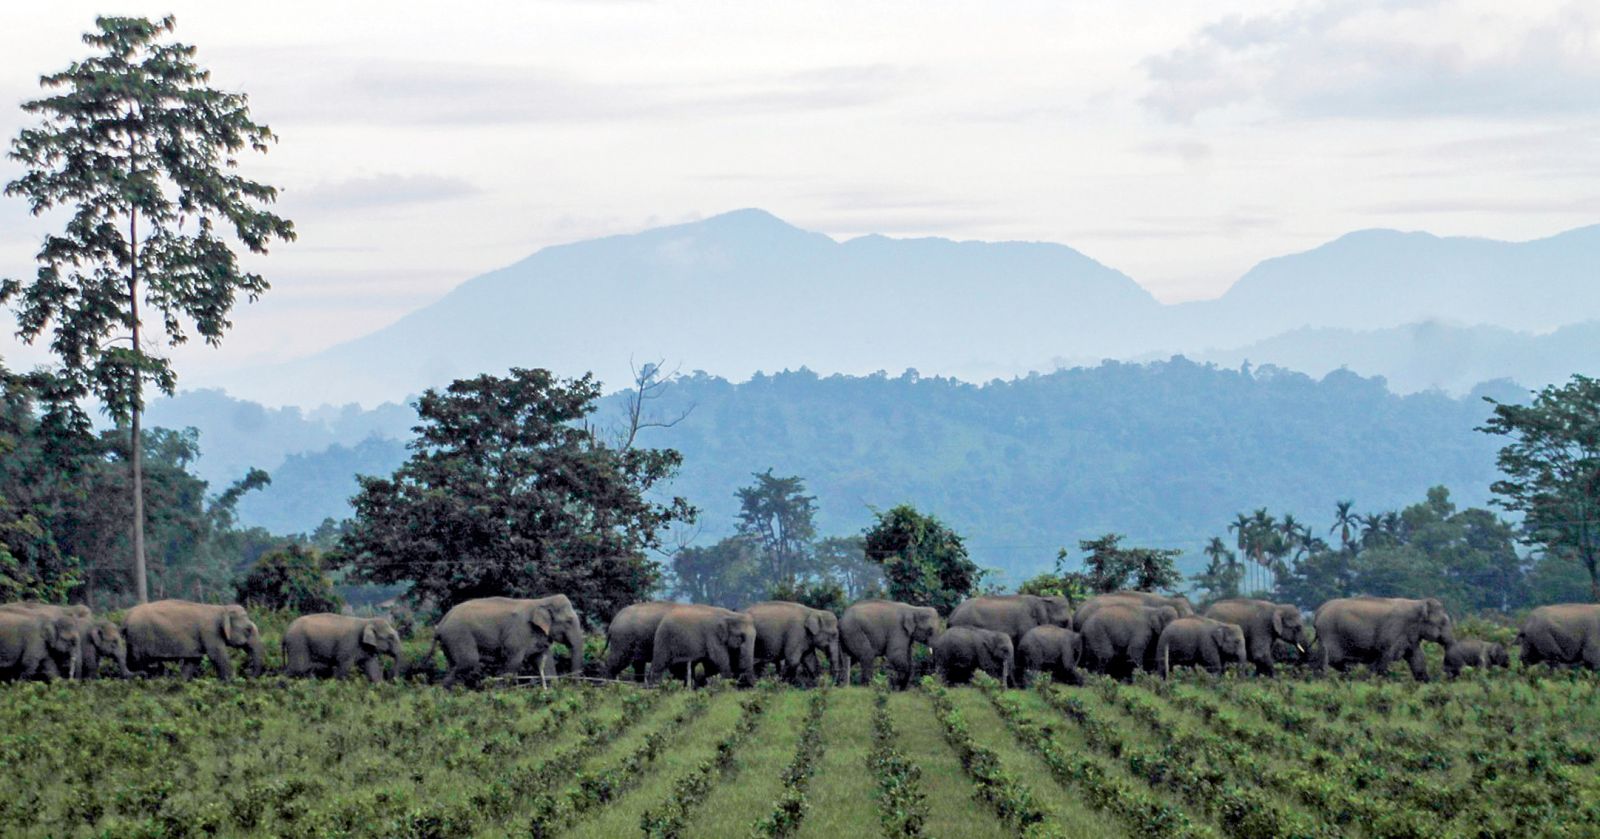 In the mountainous tea estates of Udalguri, Assam, the inevitable passage of elephants through farms and tea estates results in confl icts throughout the year.